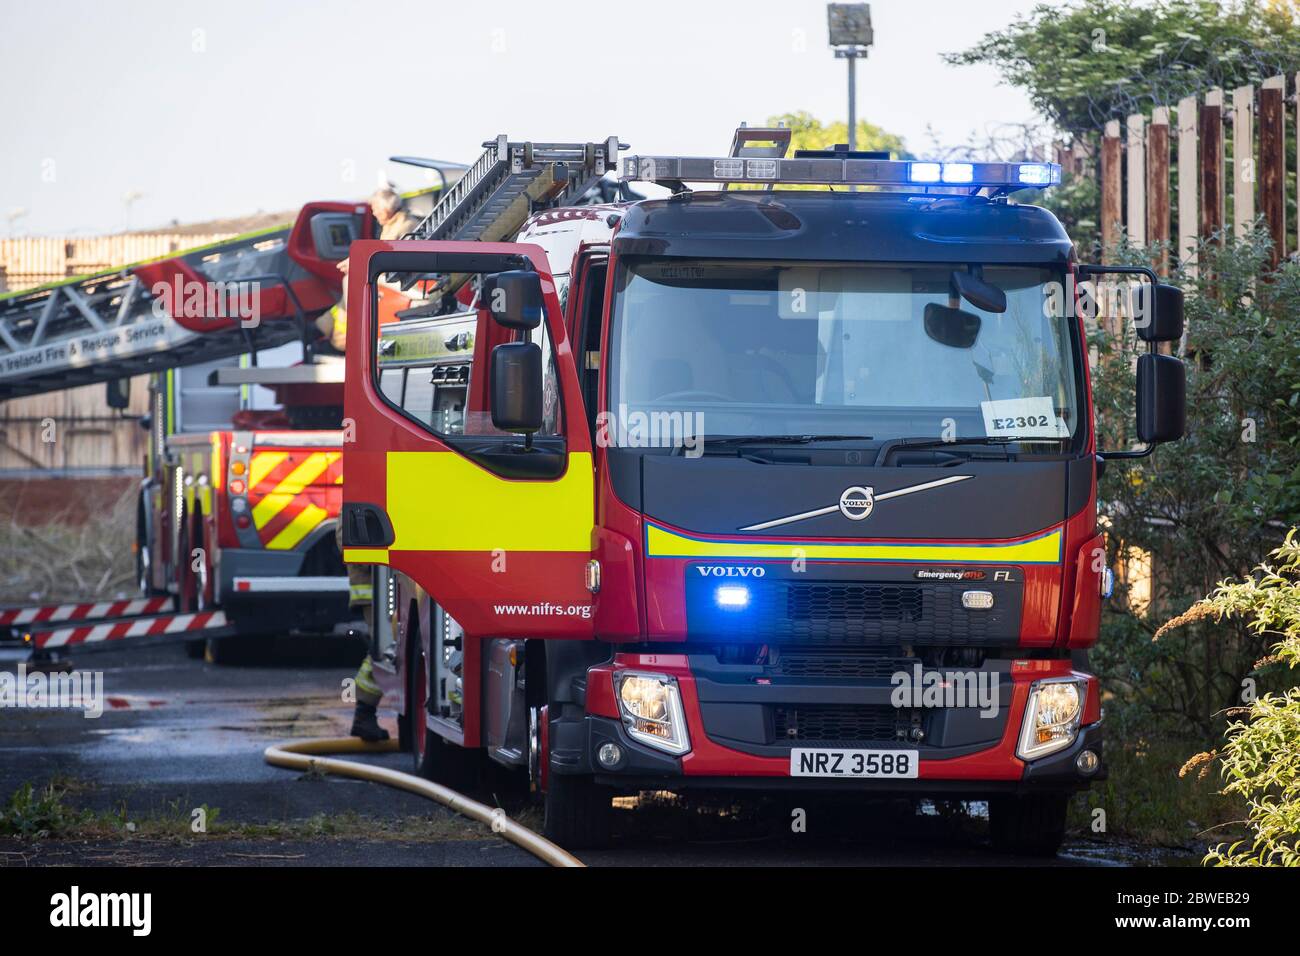 Northern Ireland Fire and Rescue Service firefighters tackling a large fire at Crumlin Road Courthouse in Belfast, Northern Ireland. Stock Photo